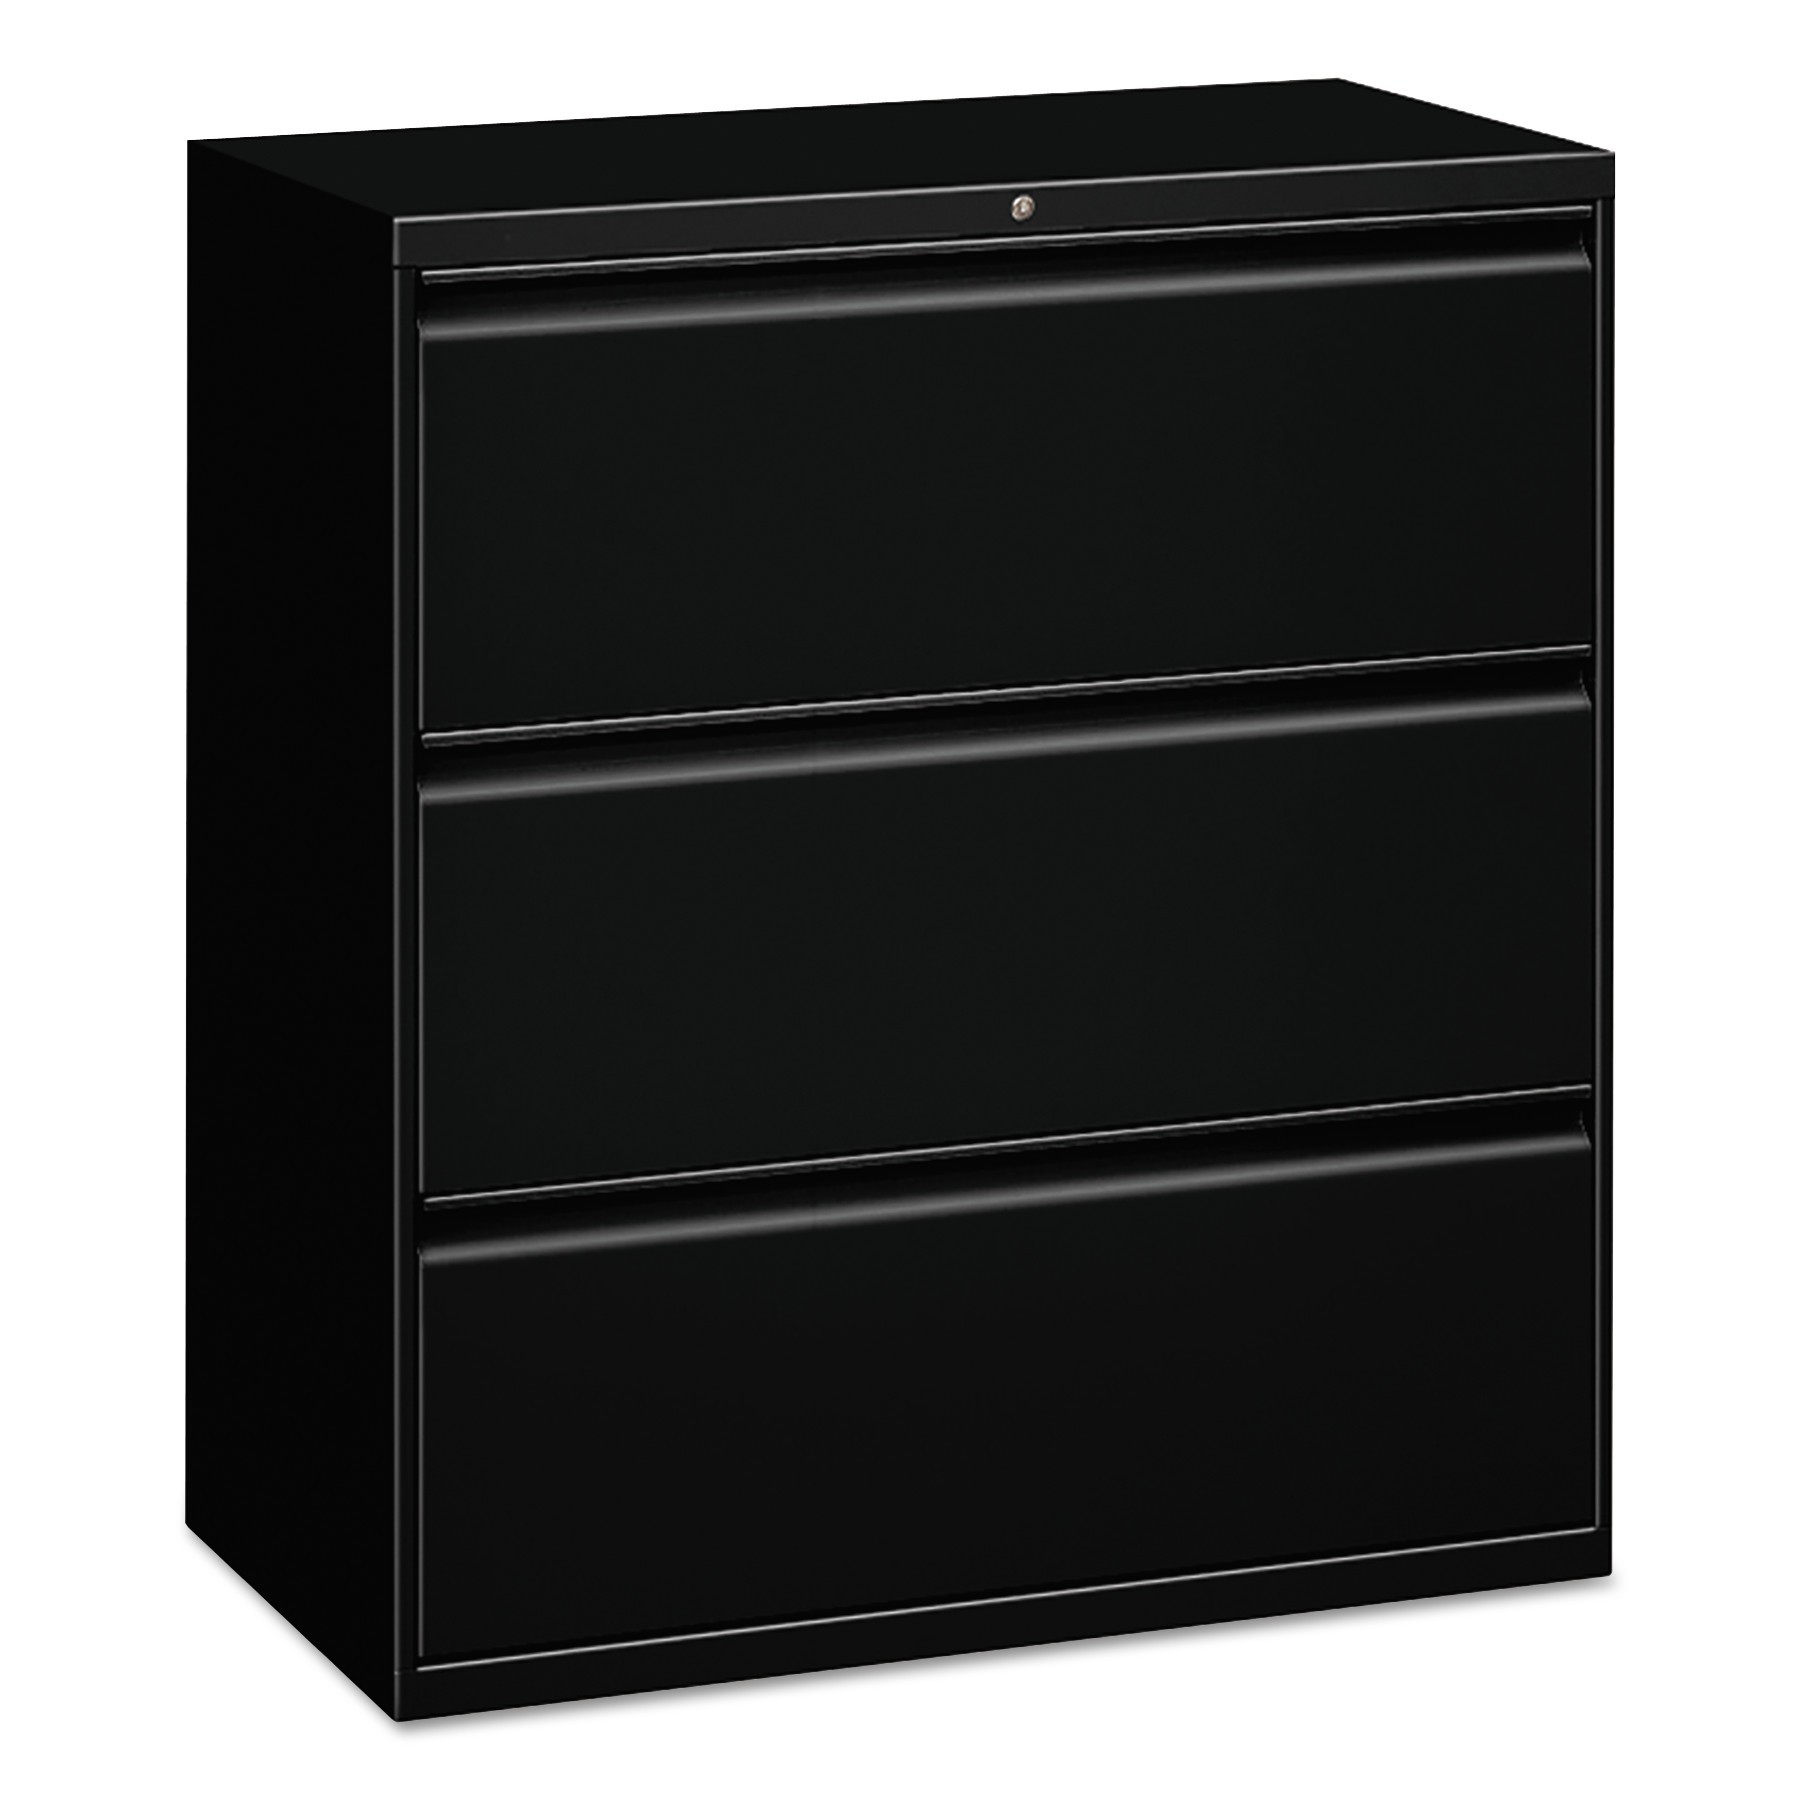 Alera ALELF3041BL Three-Drawer Lateral 30 in. x 18 in. x 39.5 in. File Cabinet - Black - image 2 of 2